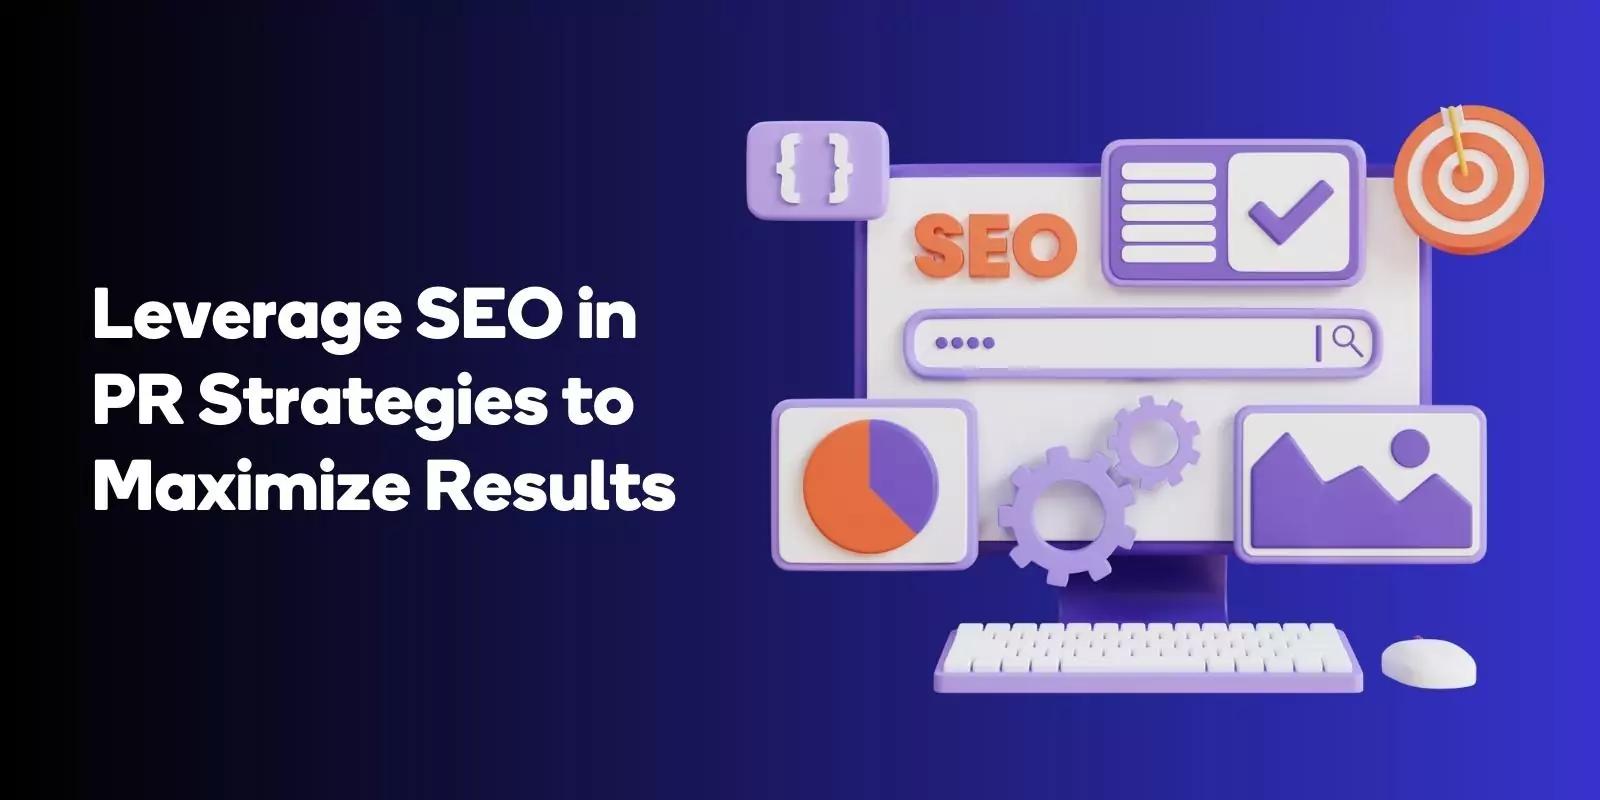 Leverage SEO in PR Strategies to Maximize Results